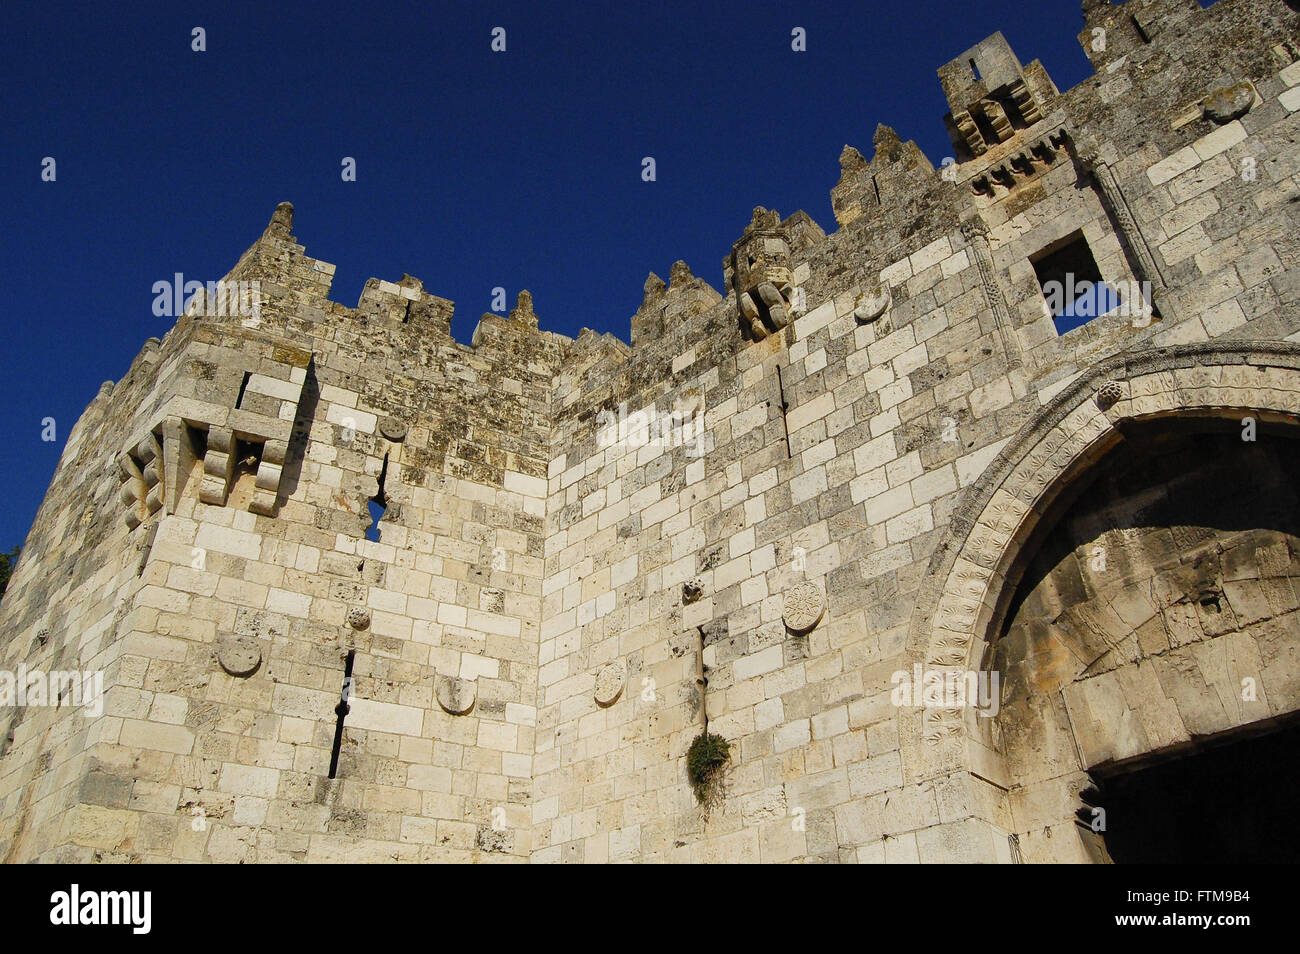 Damascus Gate in the Old City of Jerusalem Stock Photo